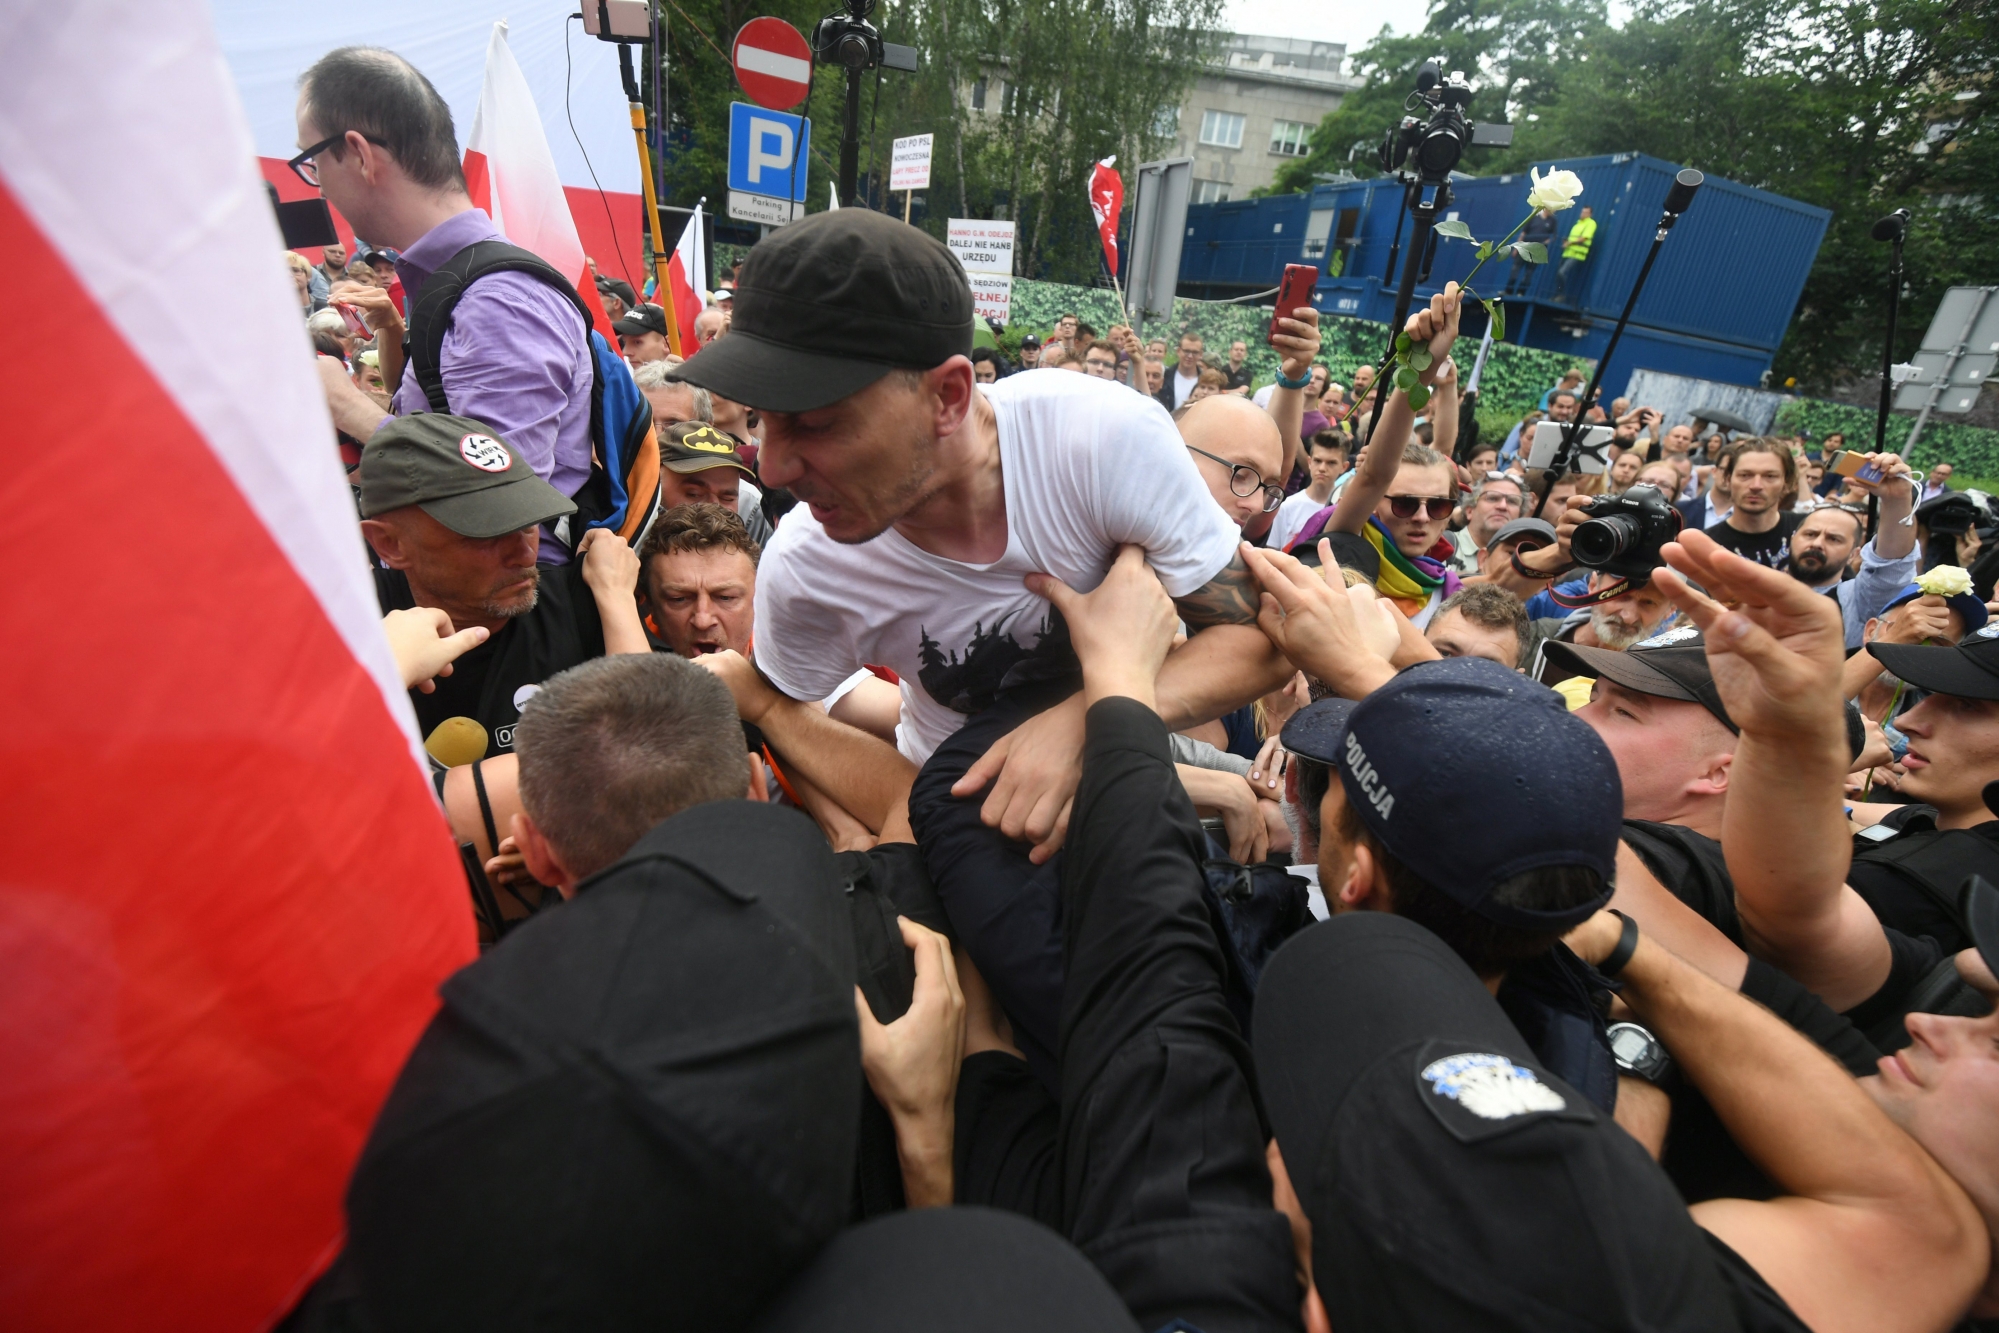 epa06099203 Protesters try to break through a barrier guarded by Policemen during a demonstration in front of the Sejm building in Warsaw, Poland, 20 July 2017. People protest against changes in the judicial law and the Supreme Court, which were passed today by the Law and Justice's majority in Sejm.  EPA/Bartlomiej Zborowski POLAND OUT POLAND PROTEST